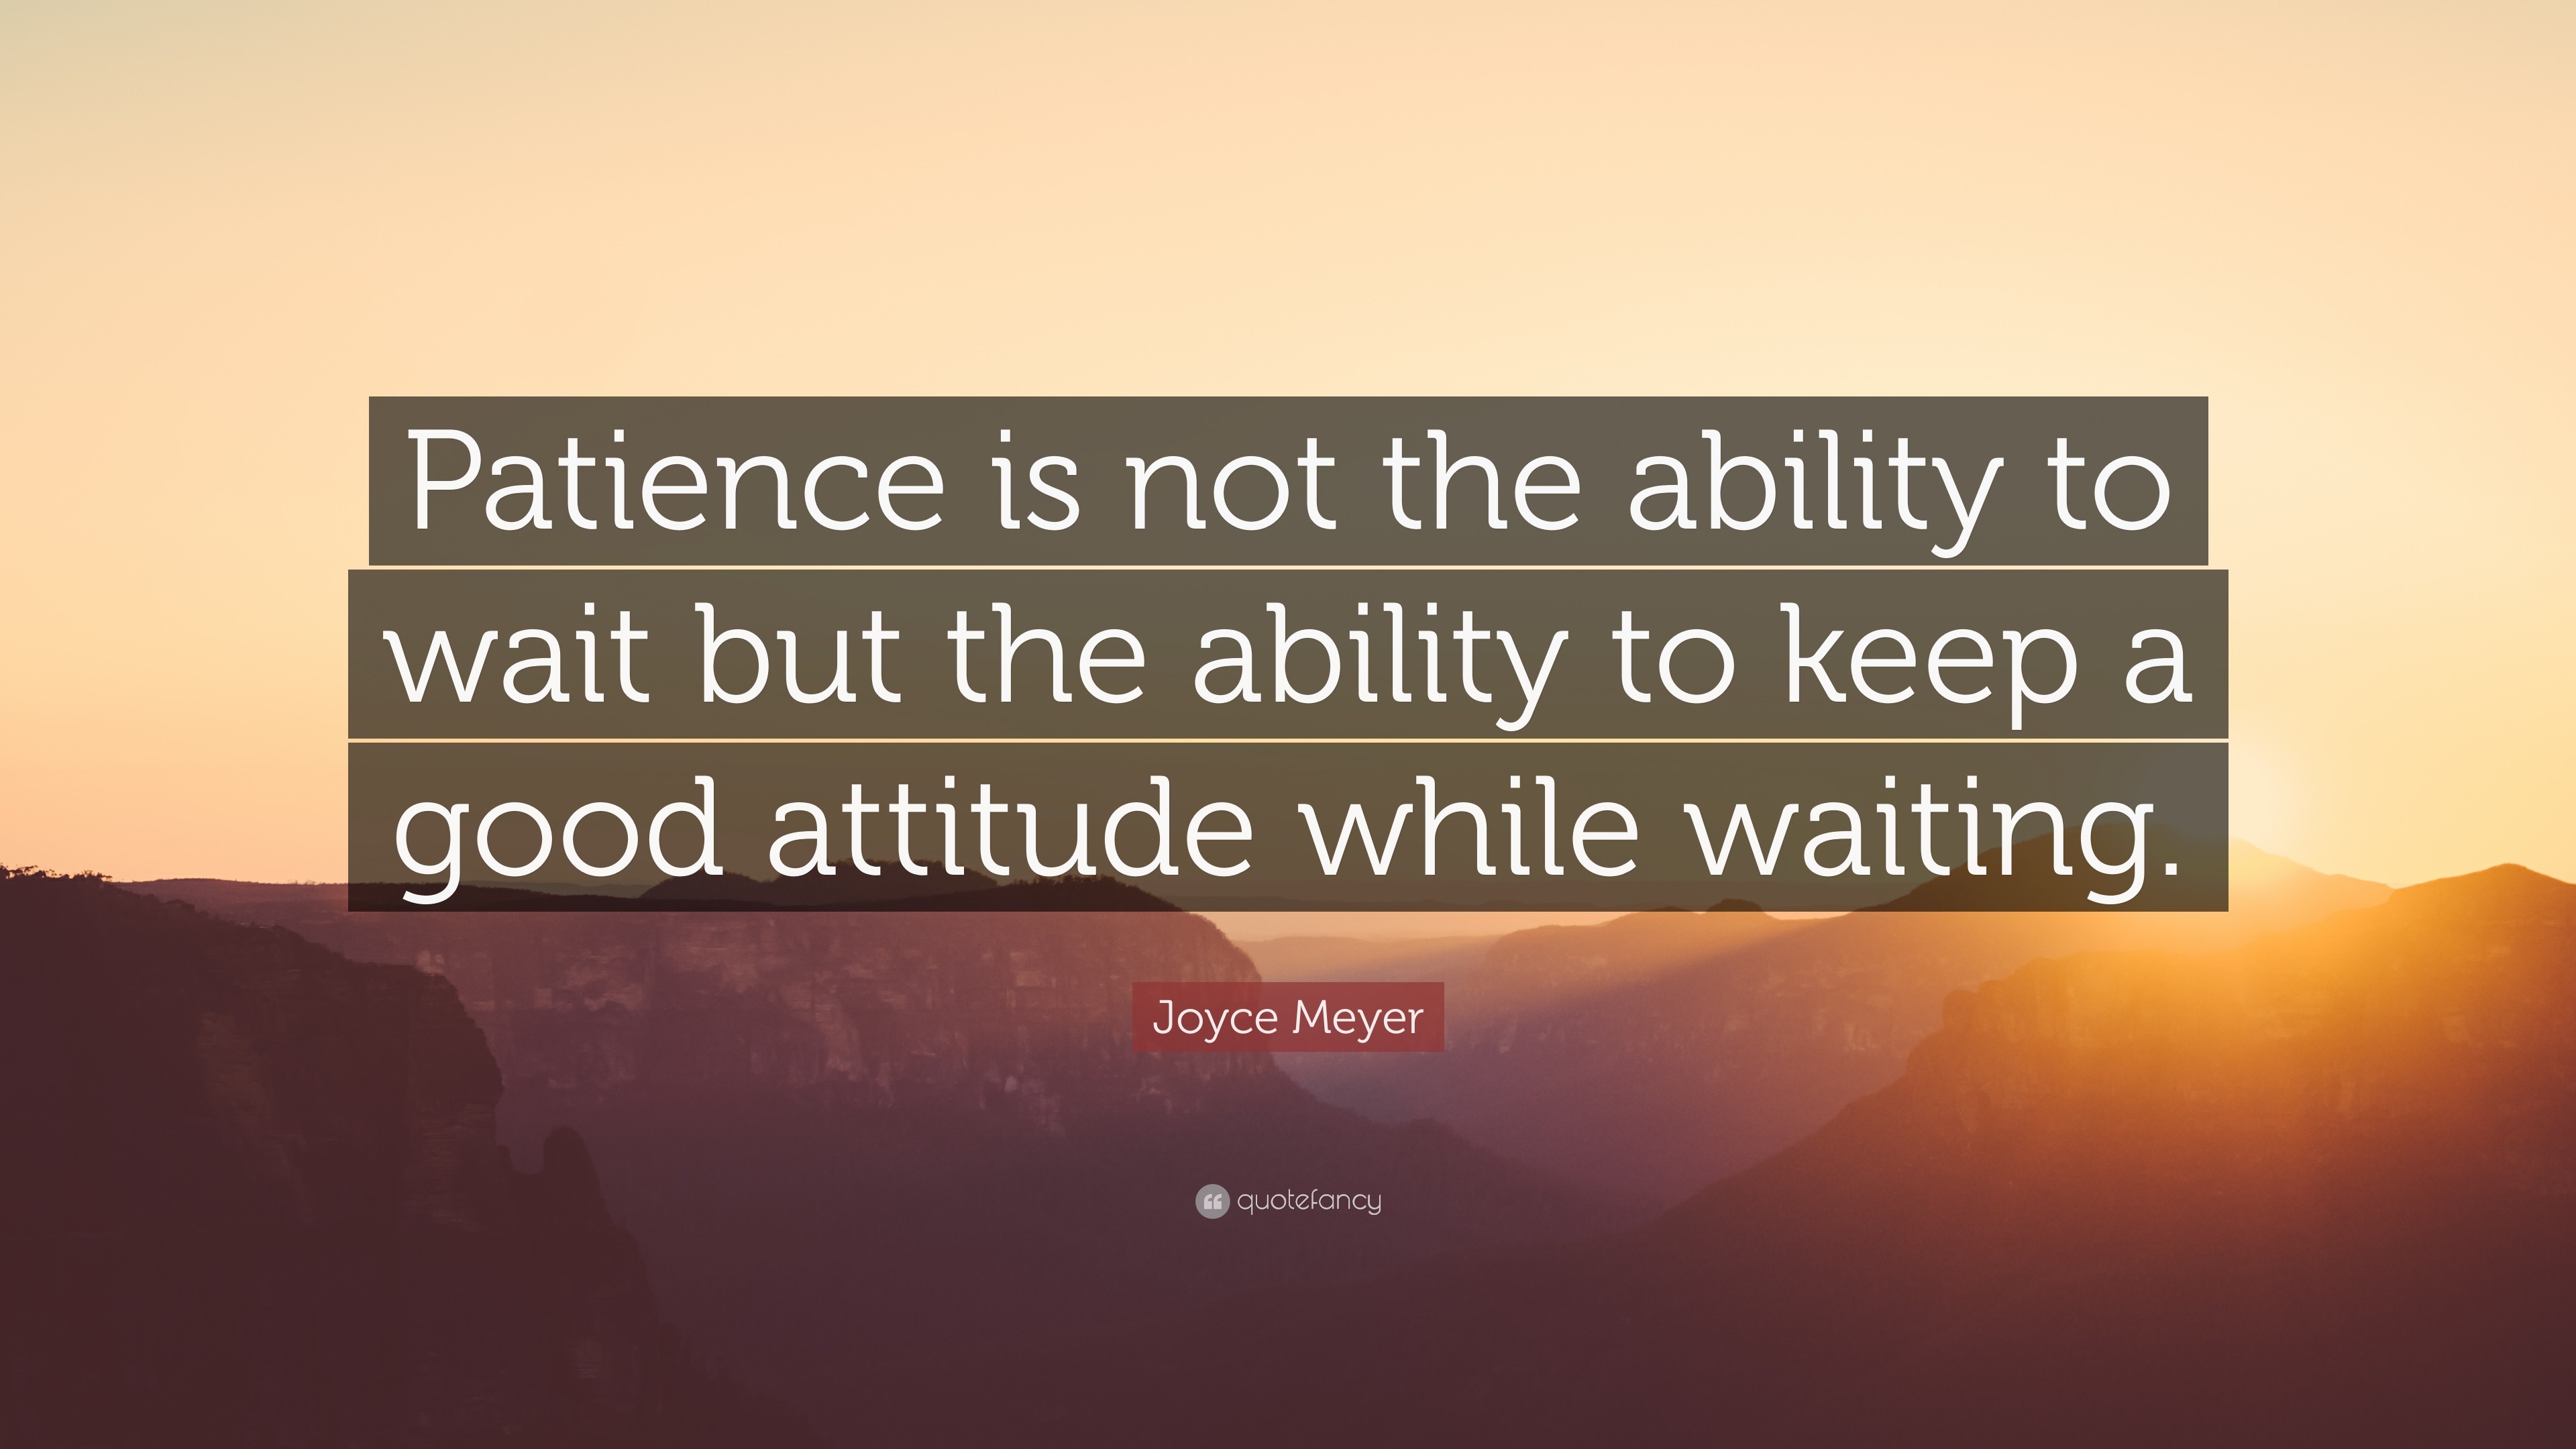 3840x2160 Patience Quotes: “Patience is not the ability to wait but the ability to  keep